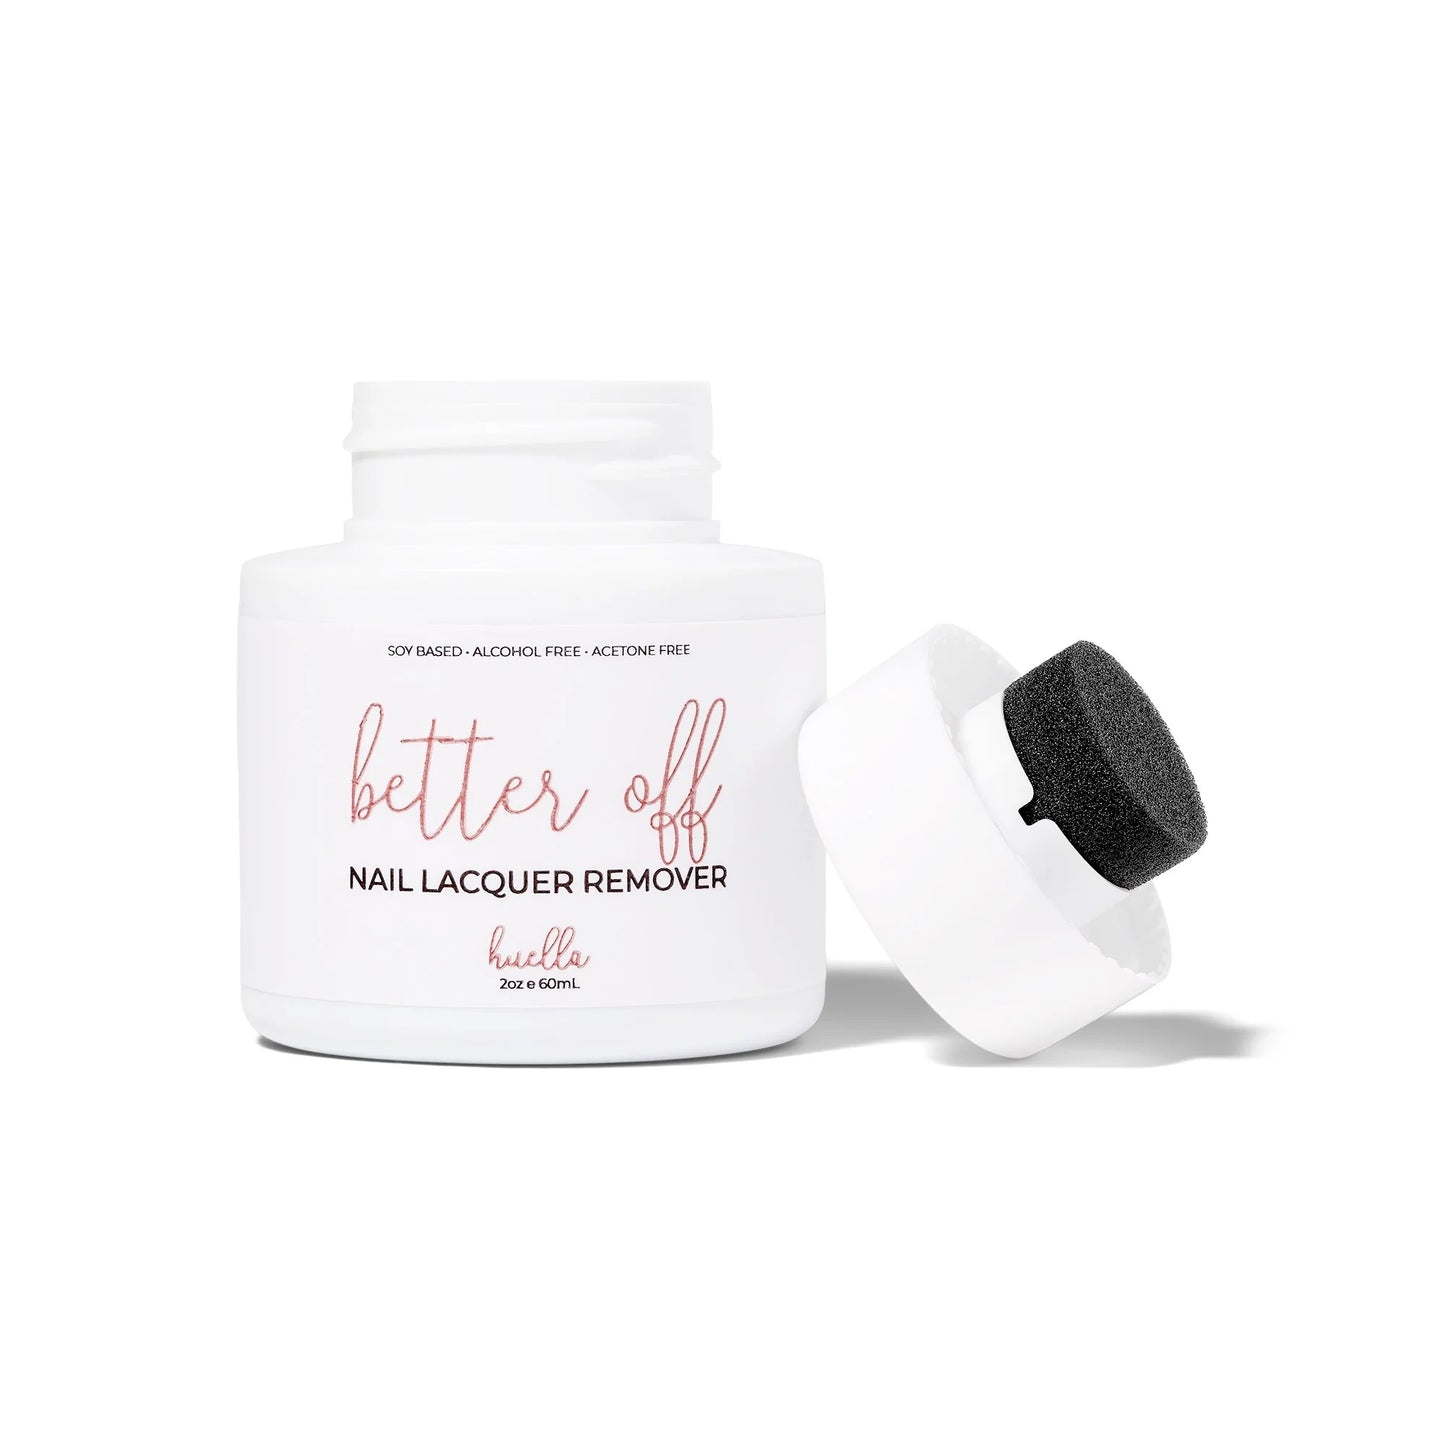 HUELLA Better Off Plant Based Nail Lacquer Remover